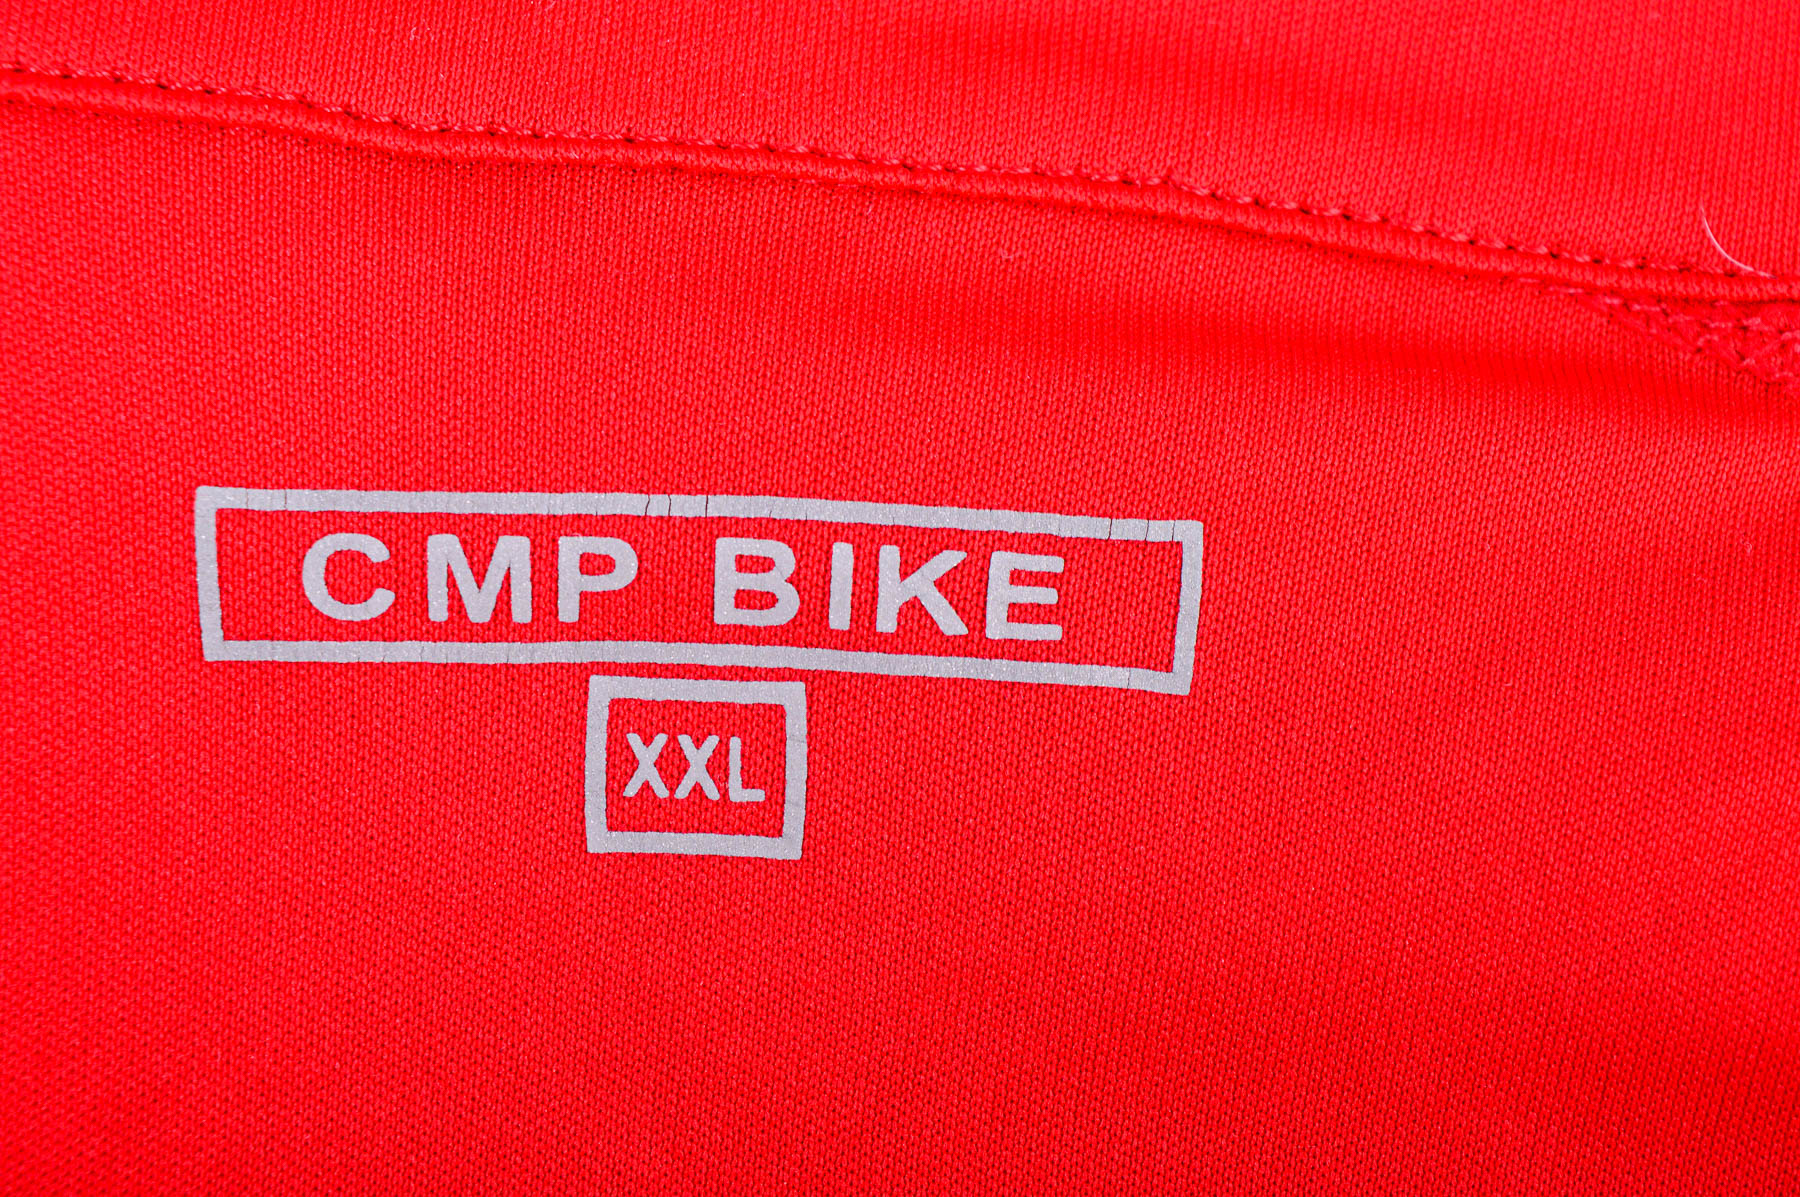 Male sports top for cycling - CMP BIKE - 2